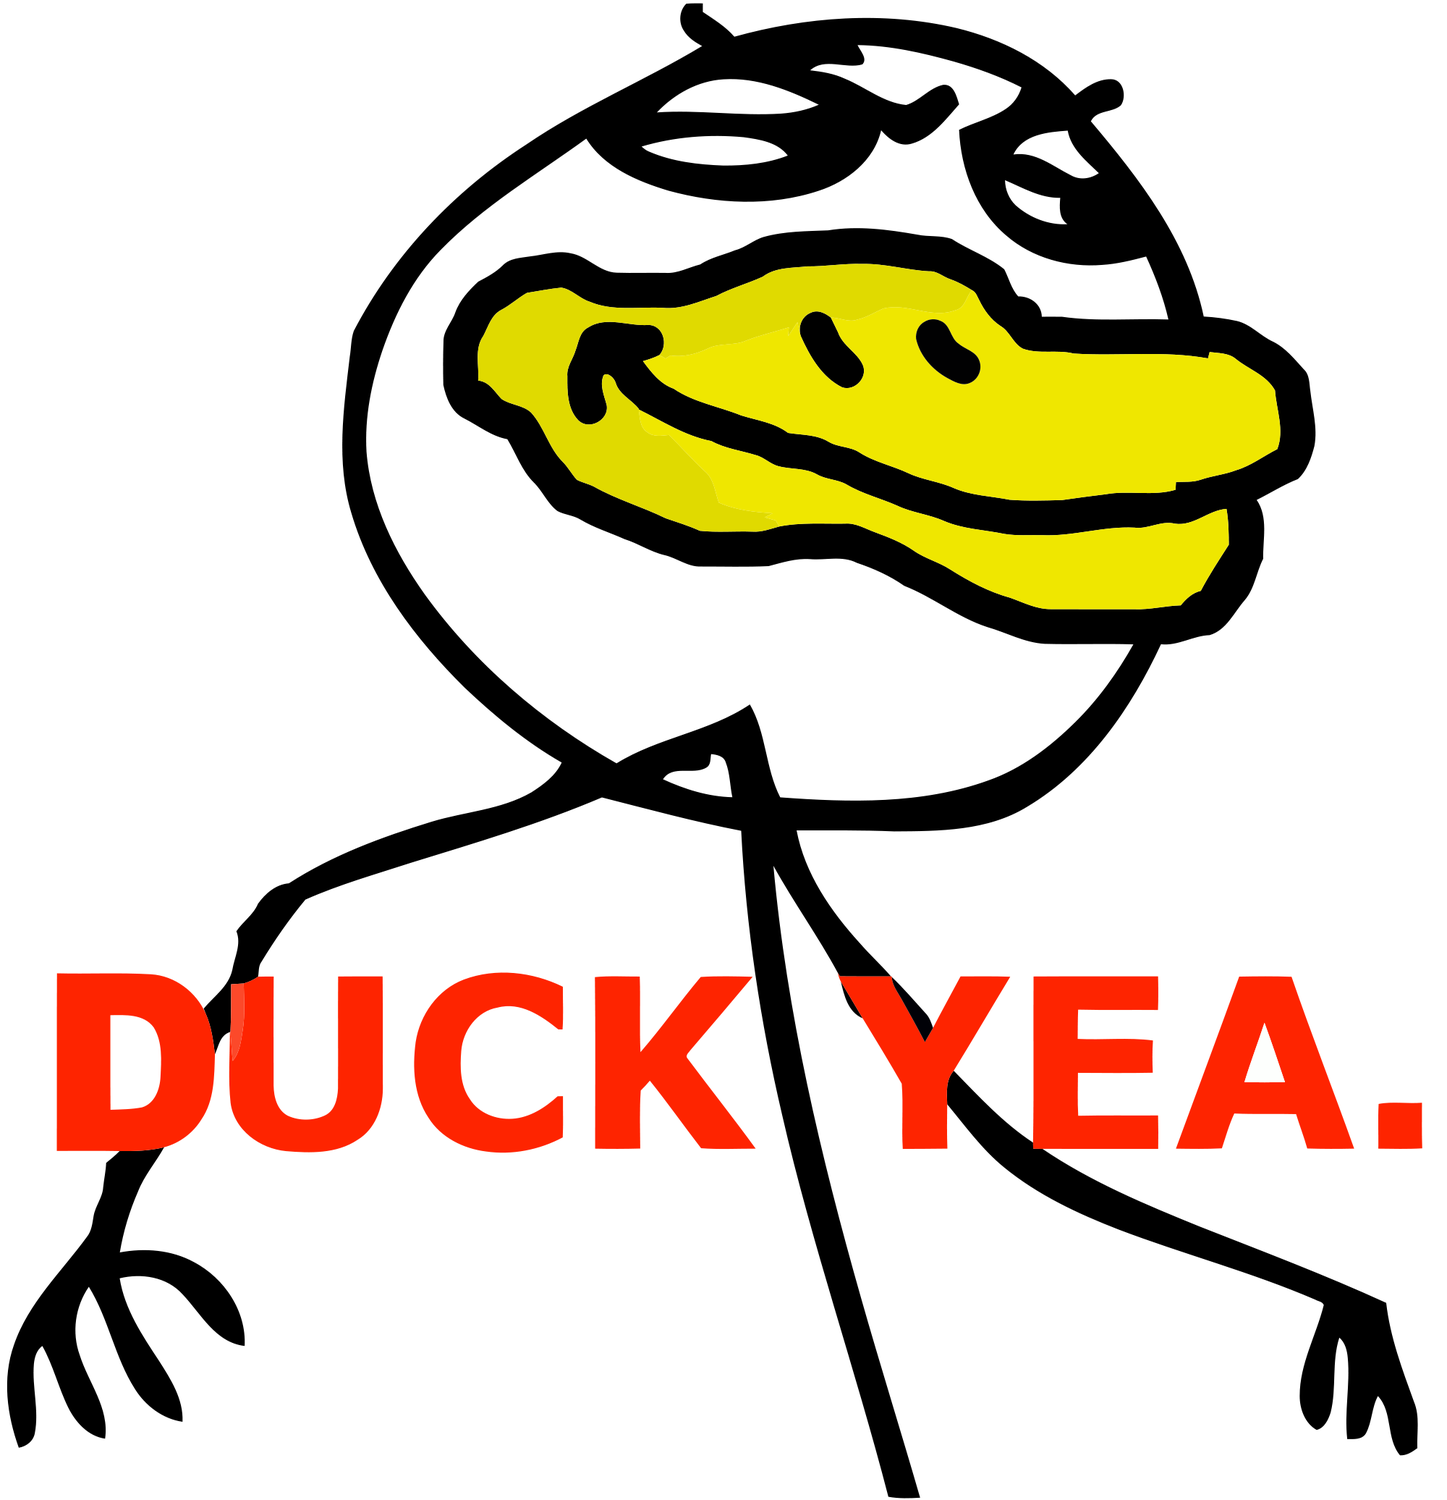 Image Duck Yeahpng Teh Meme Wiki FANDOM Powered By Wikia